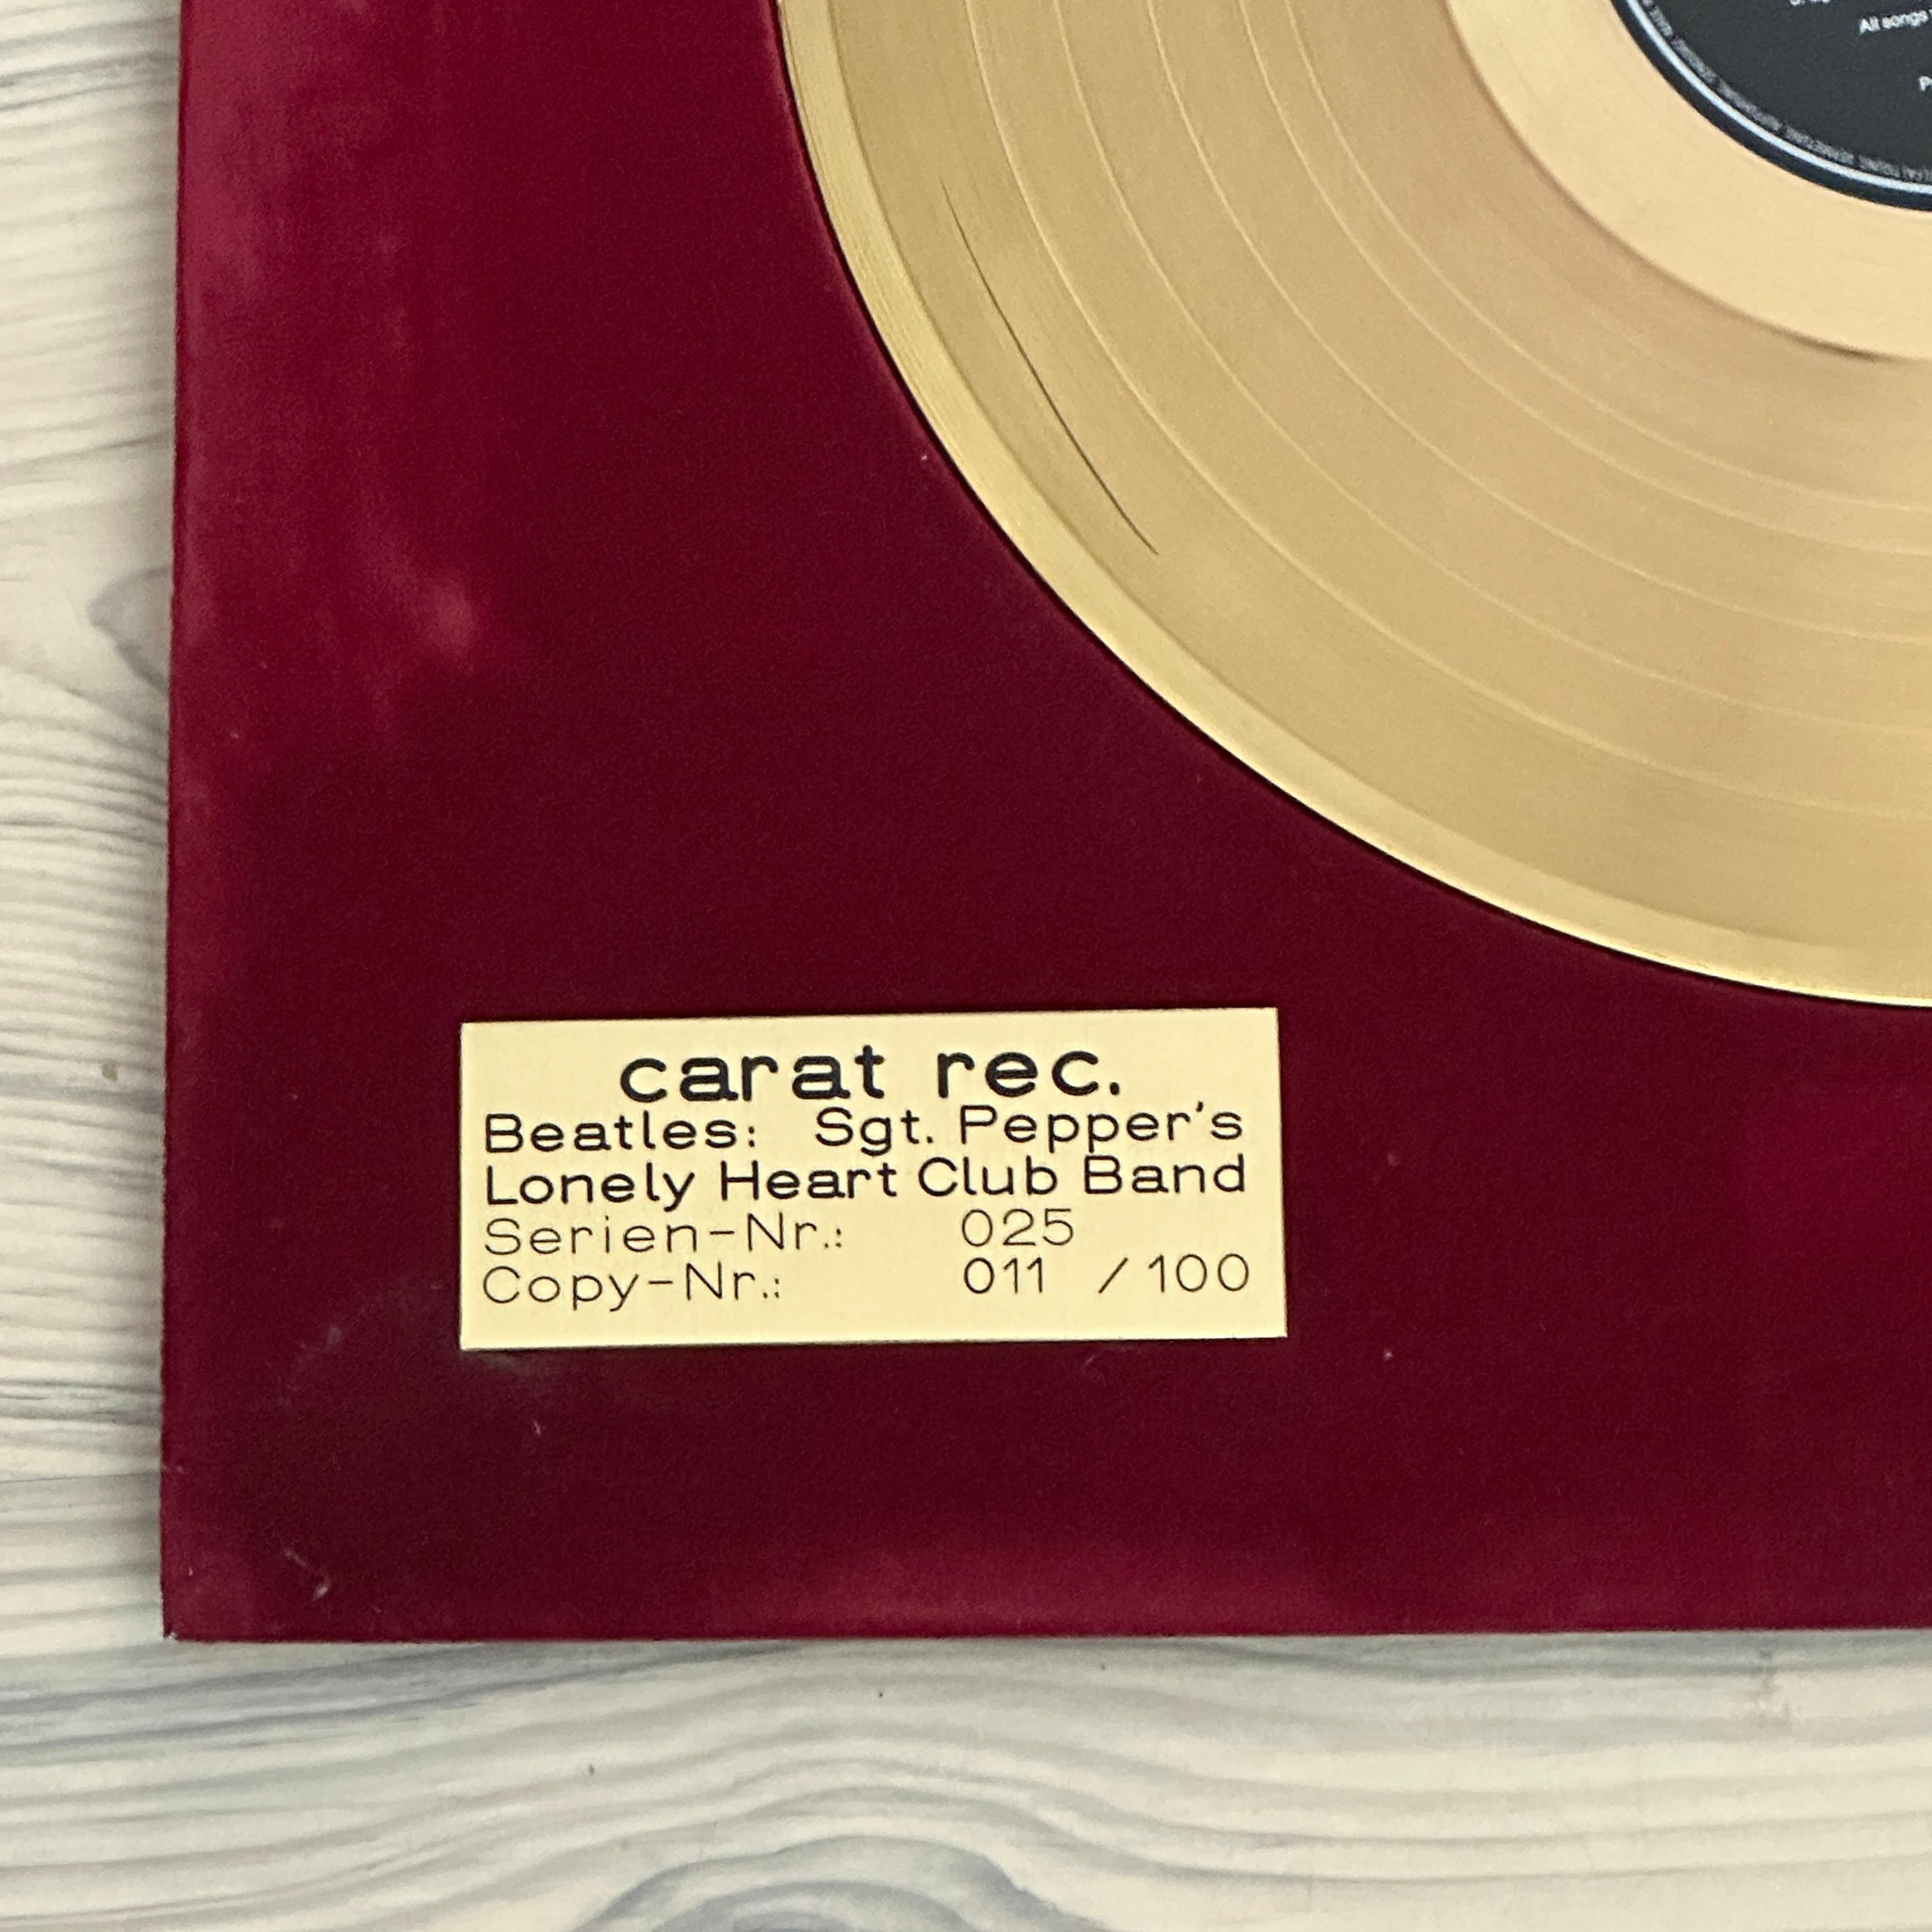 Beatles Sgt. Peppers Lonely Hearts Club Band Golden Record Carat Rec 011/100 For Sale 9